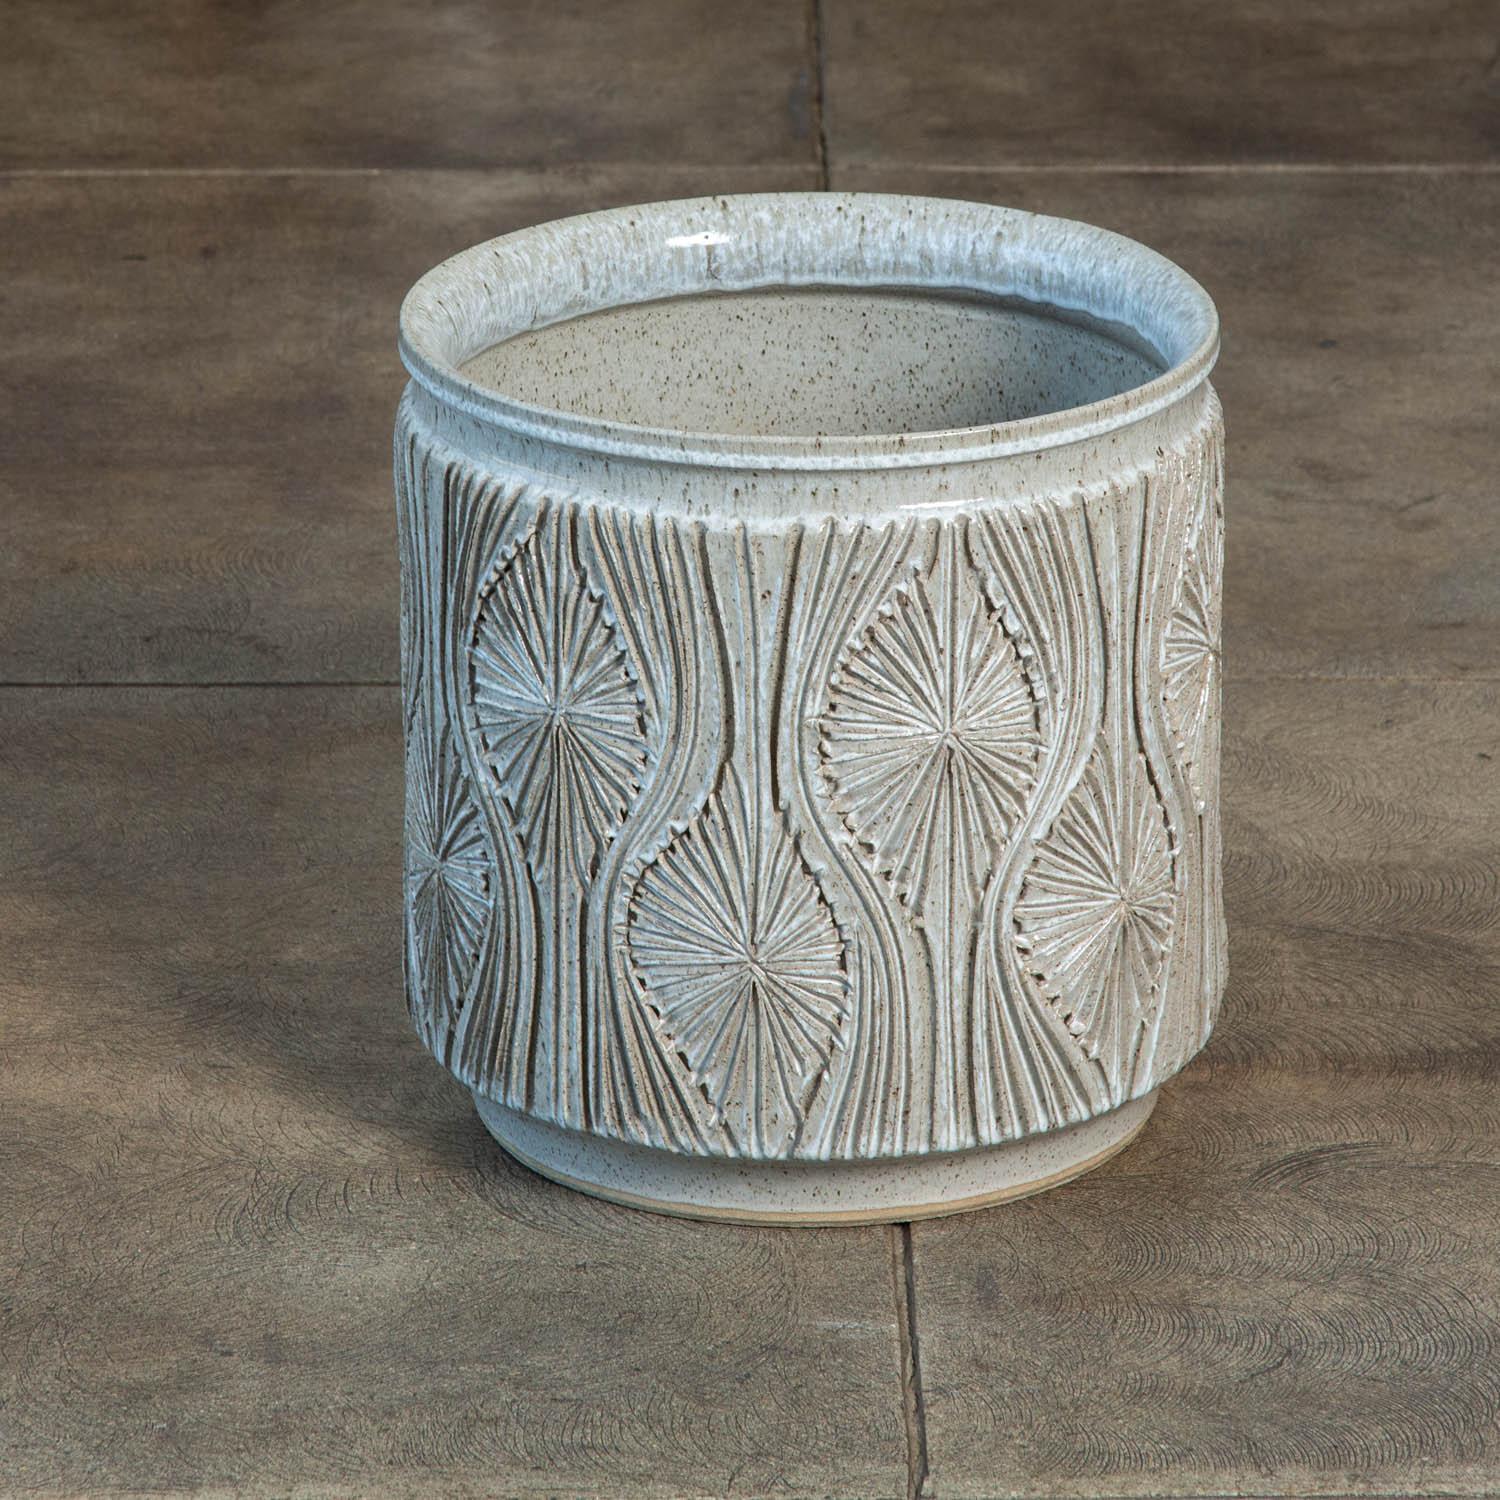 A cylindrical planter from Earthgender, David Cressey and Robert Maxwell’s early 1970s project. This 15” diameter example is incised in the “Teardrop Sunburst” design with interlocking gestural curves separating a pattern of lines radiating from a